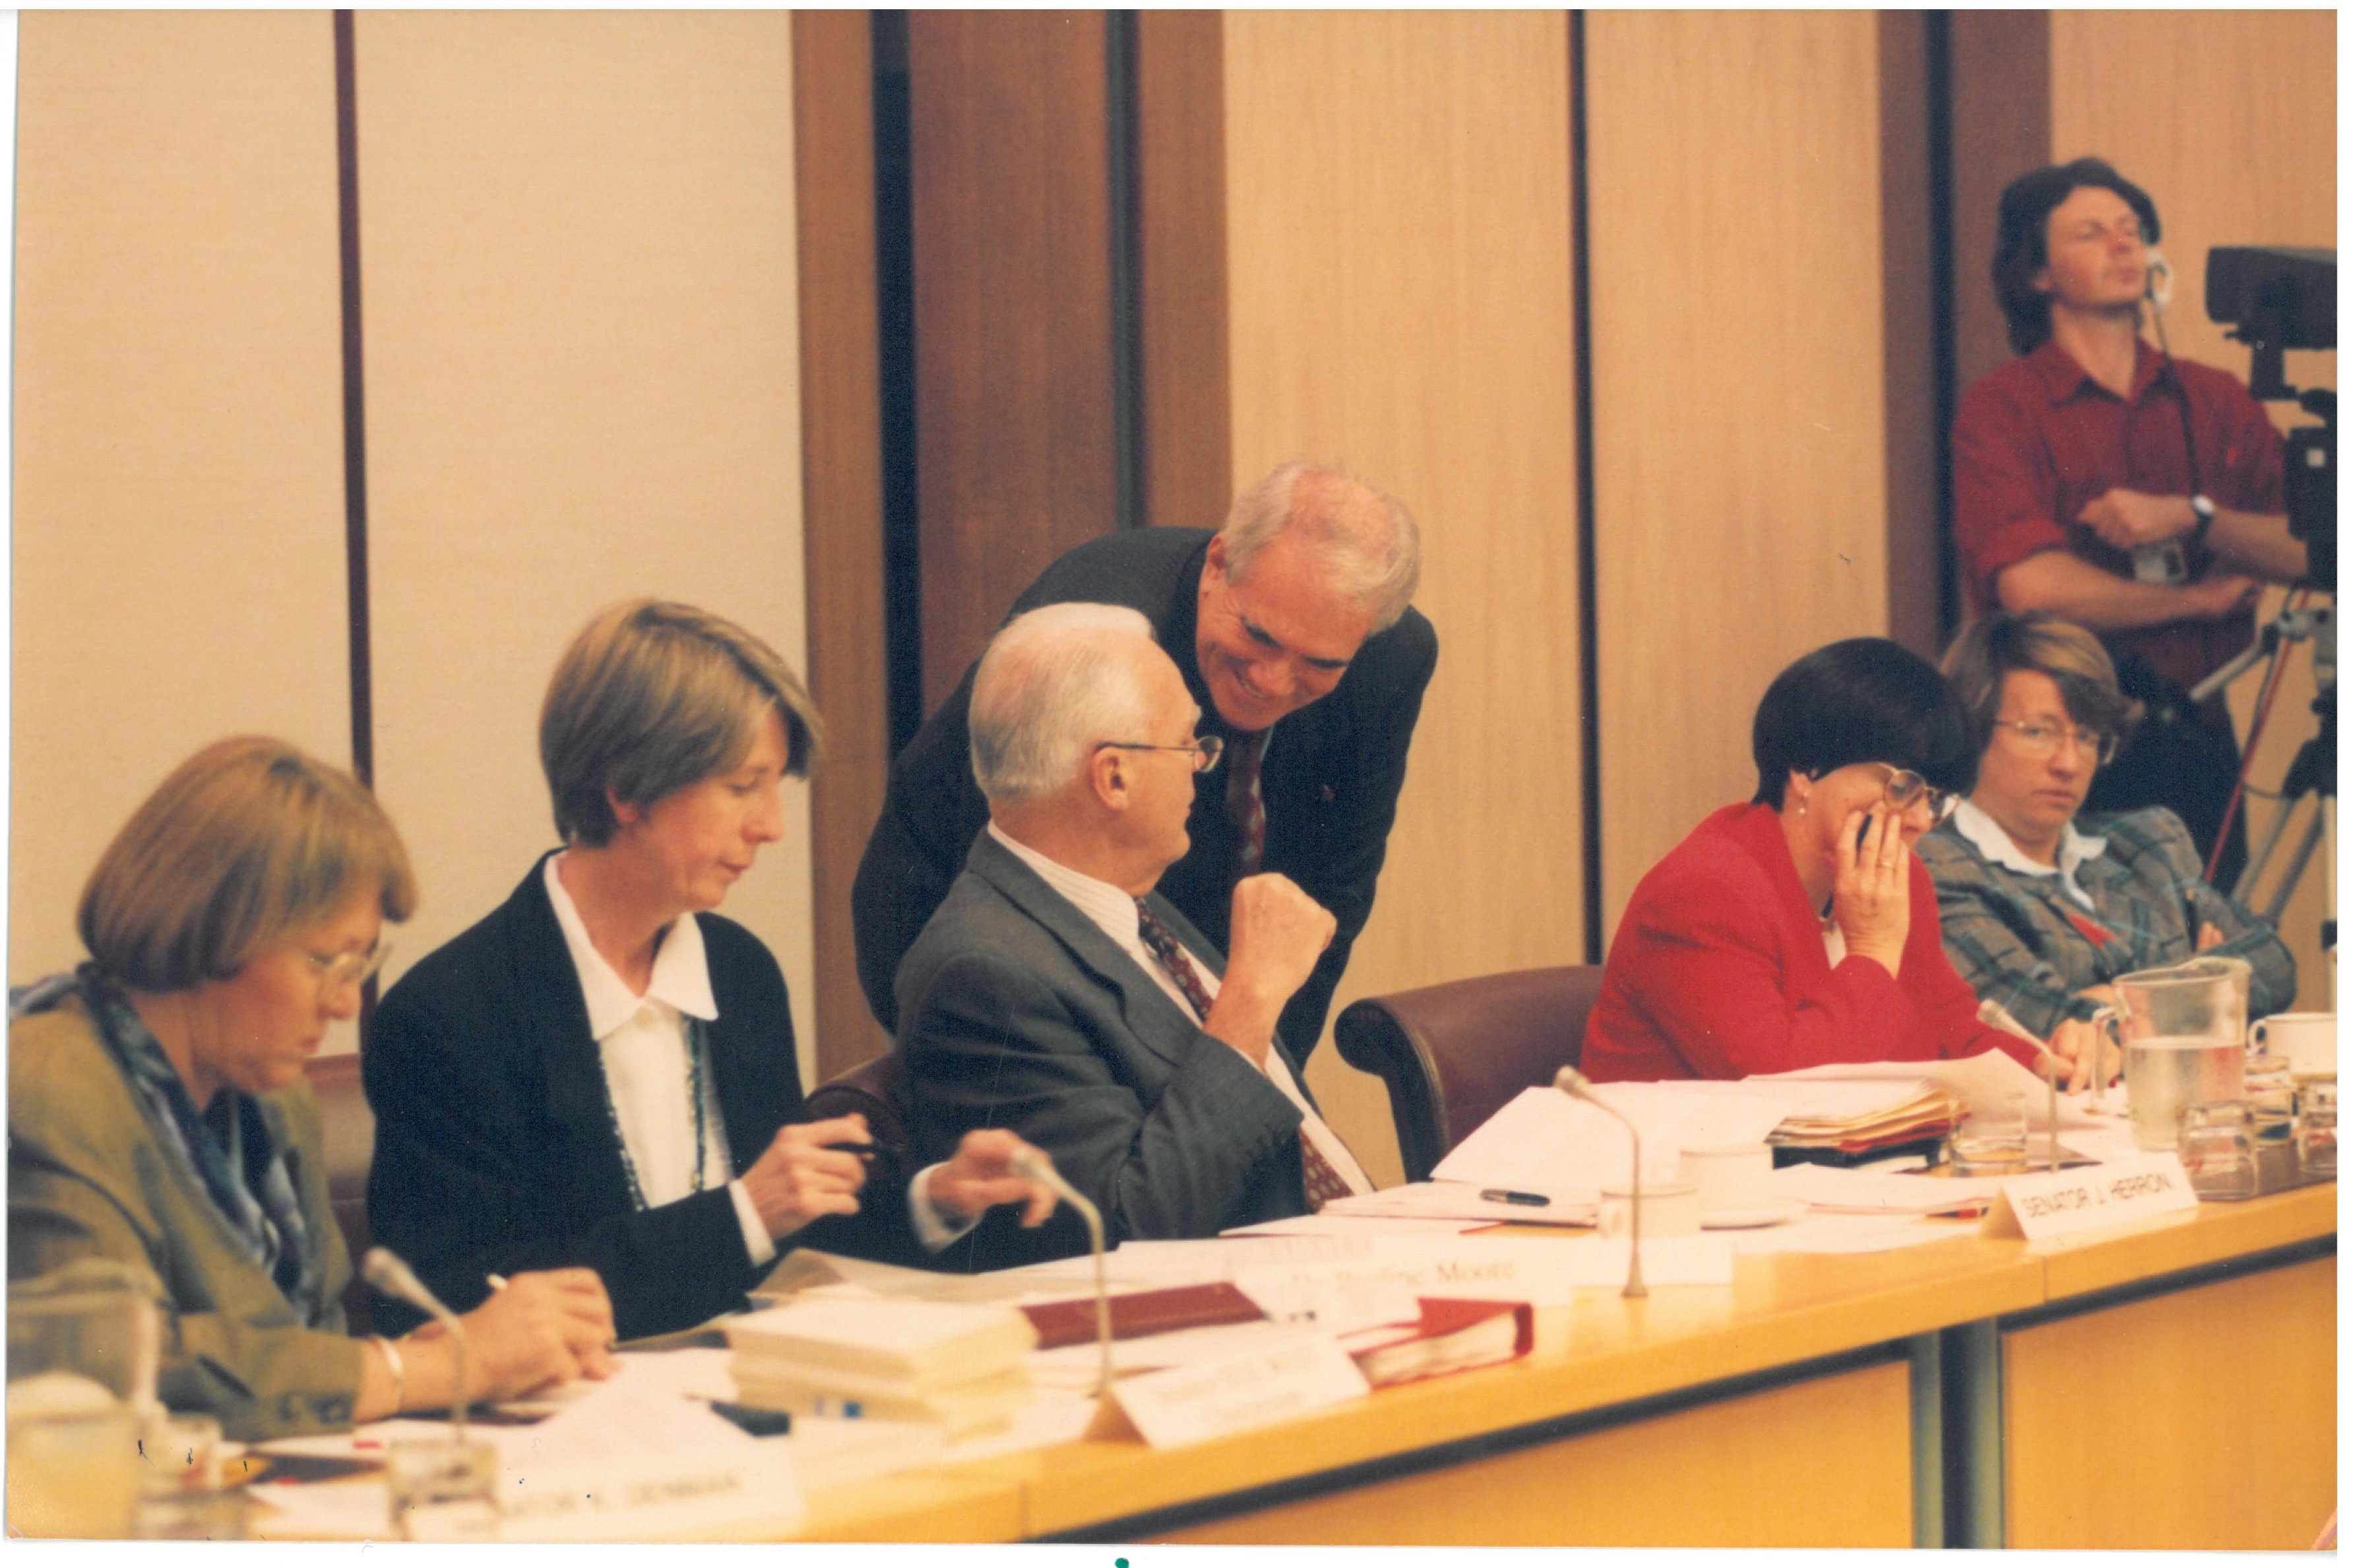 Members of the Senate Community Affairs Legislation Committee hearing evidence from witnesses at a public hearing of its inquiry into the Supported Accommodation Assistance Bill 1994 and the Supported Accommodation Assistance Amendment Bill 1994, 1 December 1994. Seated L-R: Senator Sue West [Chair], Dr Pauline Moore [Secretary], Senators John Herron, Grant Tambling, Kay Patterson and Meg Lees [Deputy Chair].